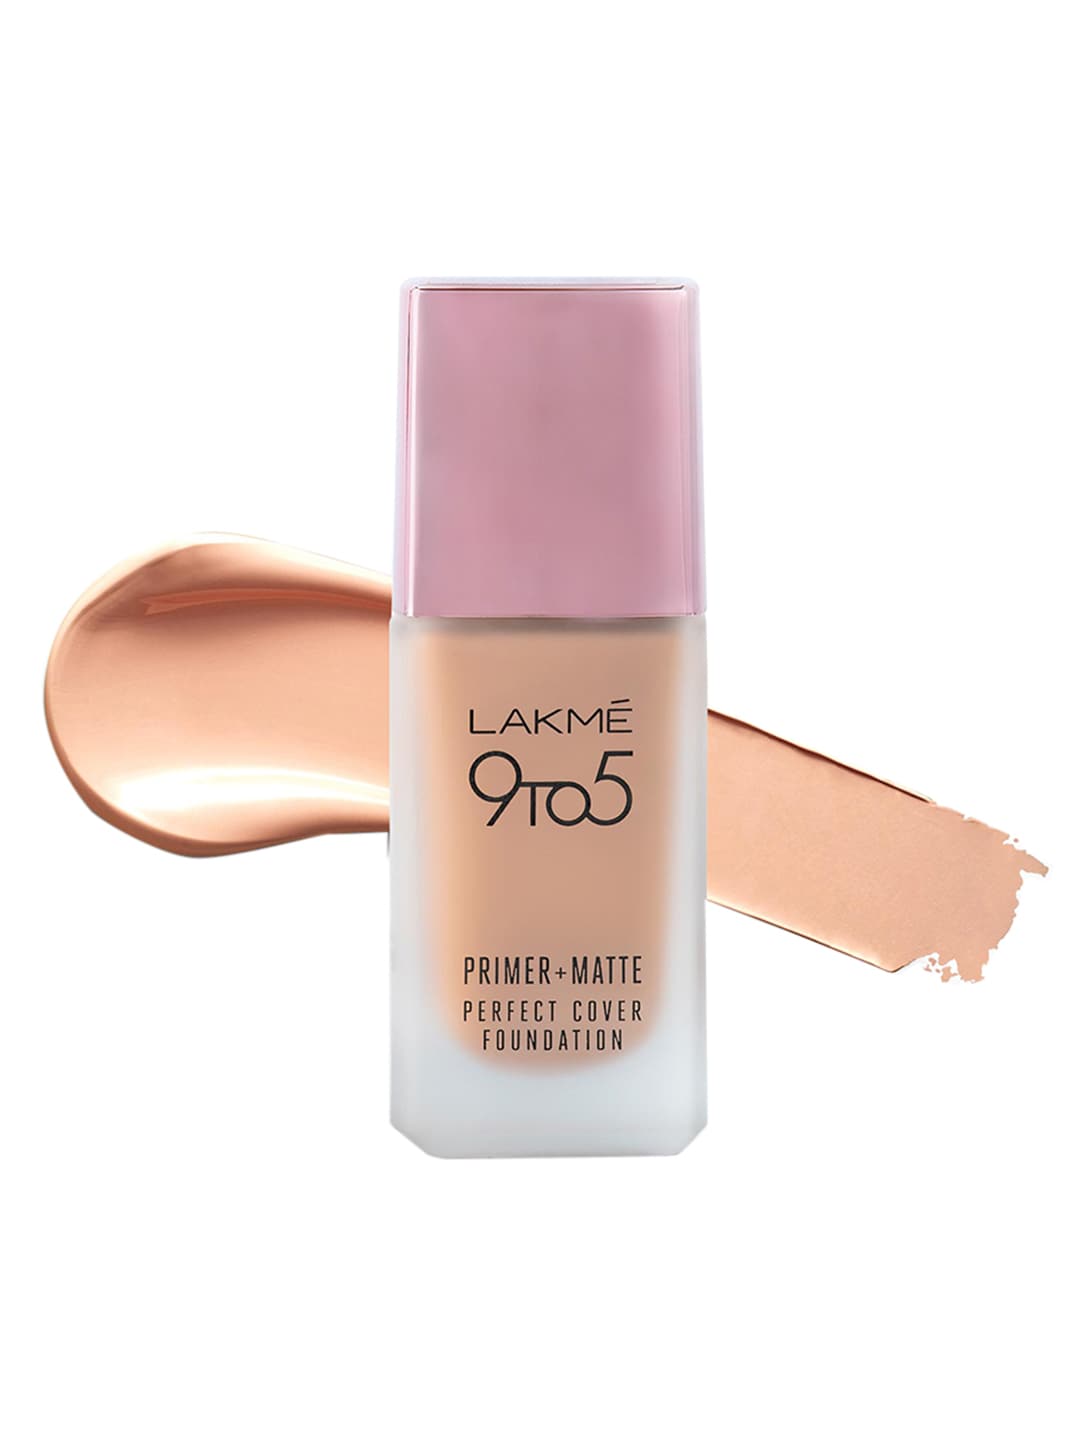 Lakme 9 To 5 Primer & Matte Perfect Cover Foundation - Cool Ivory C100 25 ml Price in India